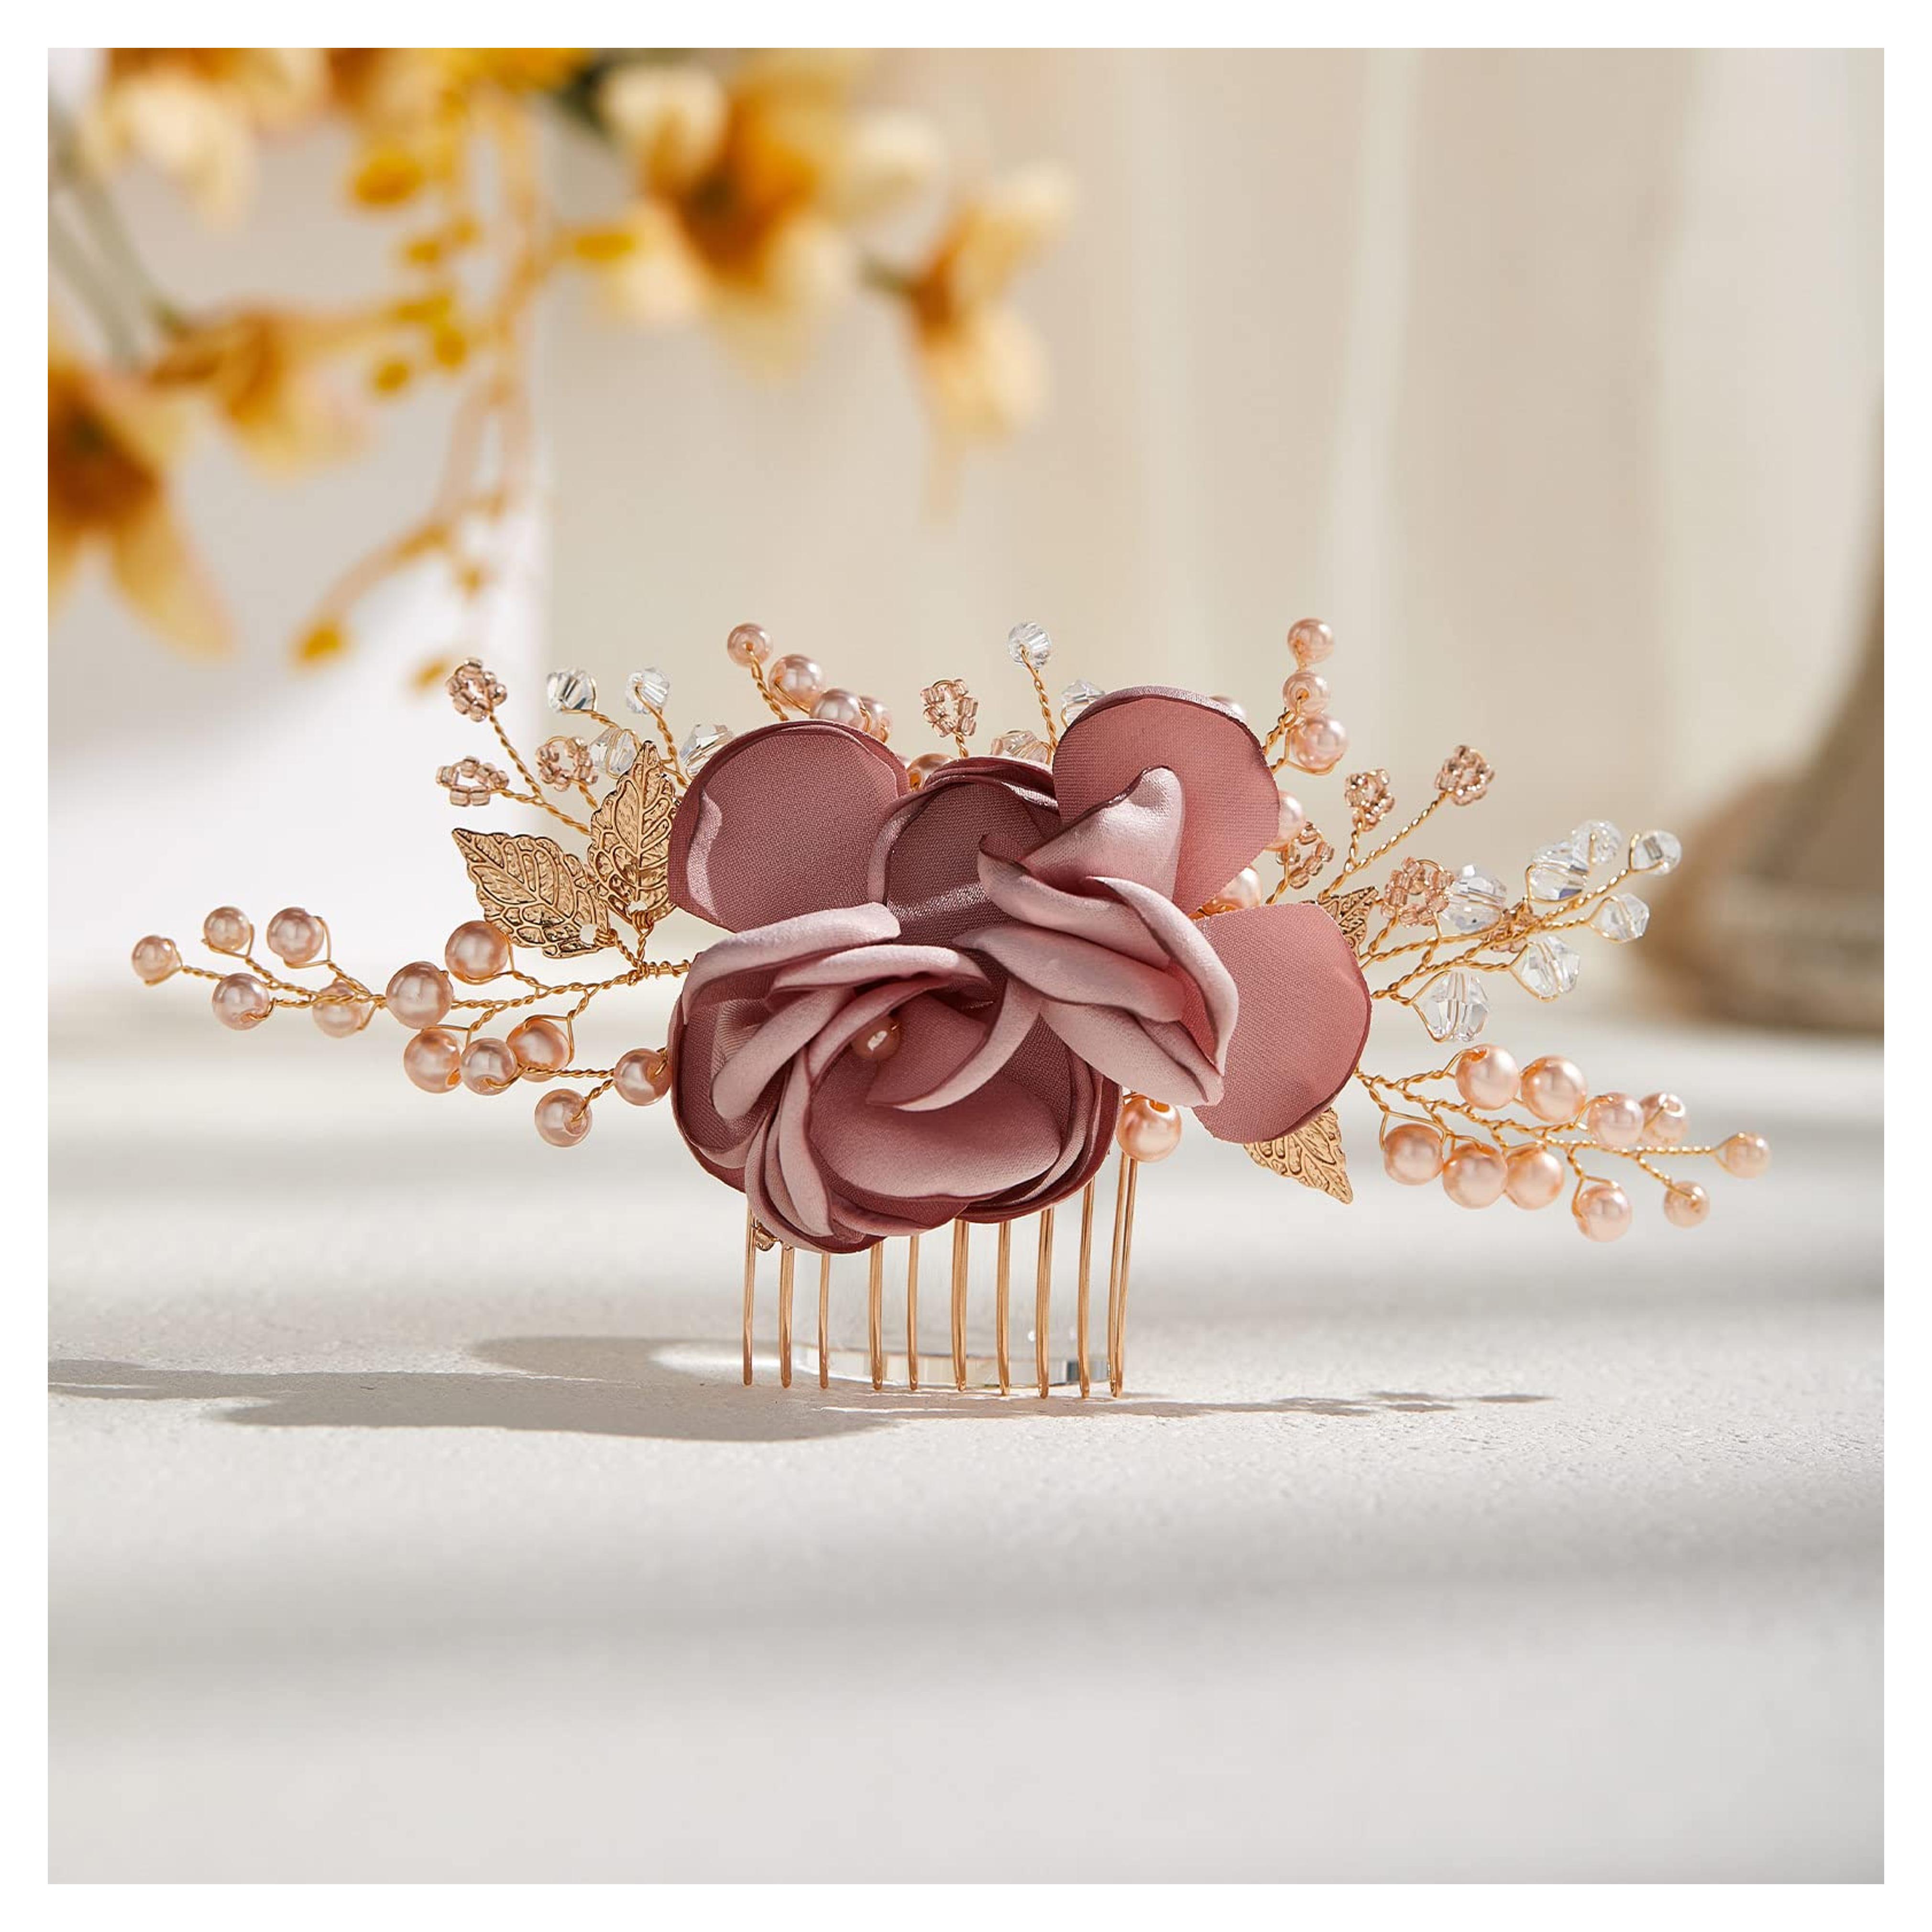 Amazon.com : AW BRIDAL Pink Rose Flower Hair Clip For Brides Gold Hair Comb For Wedding Hair Accessories For Bridesmaid Wedding Hair Pieces (Gold) : Beauty & Personal Care